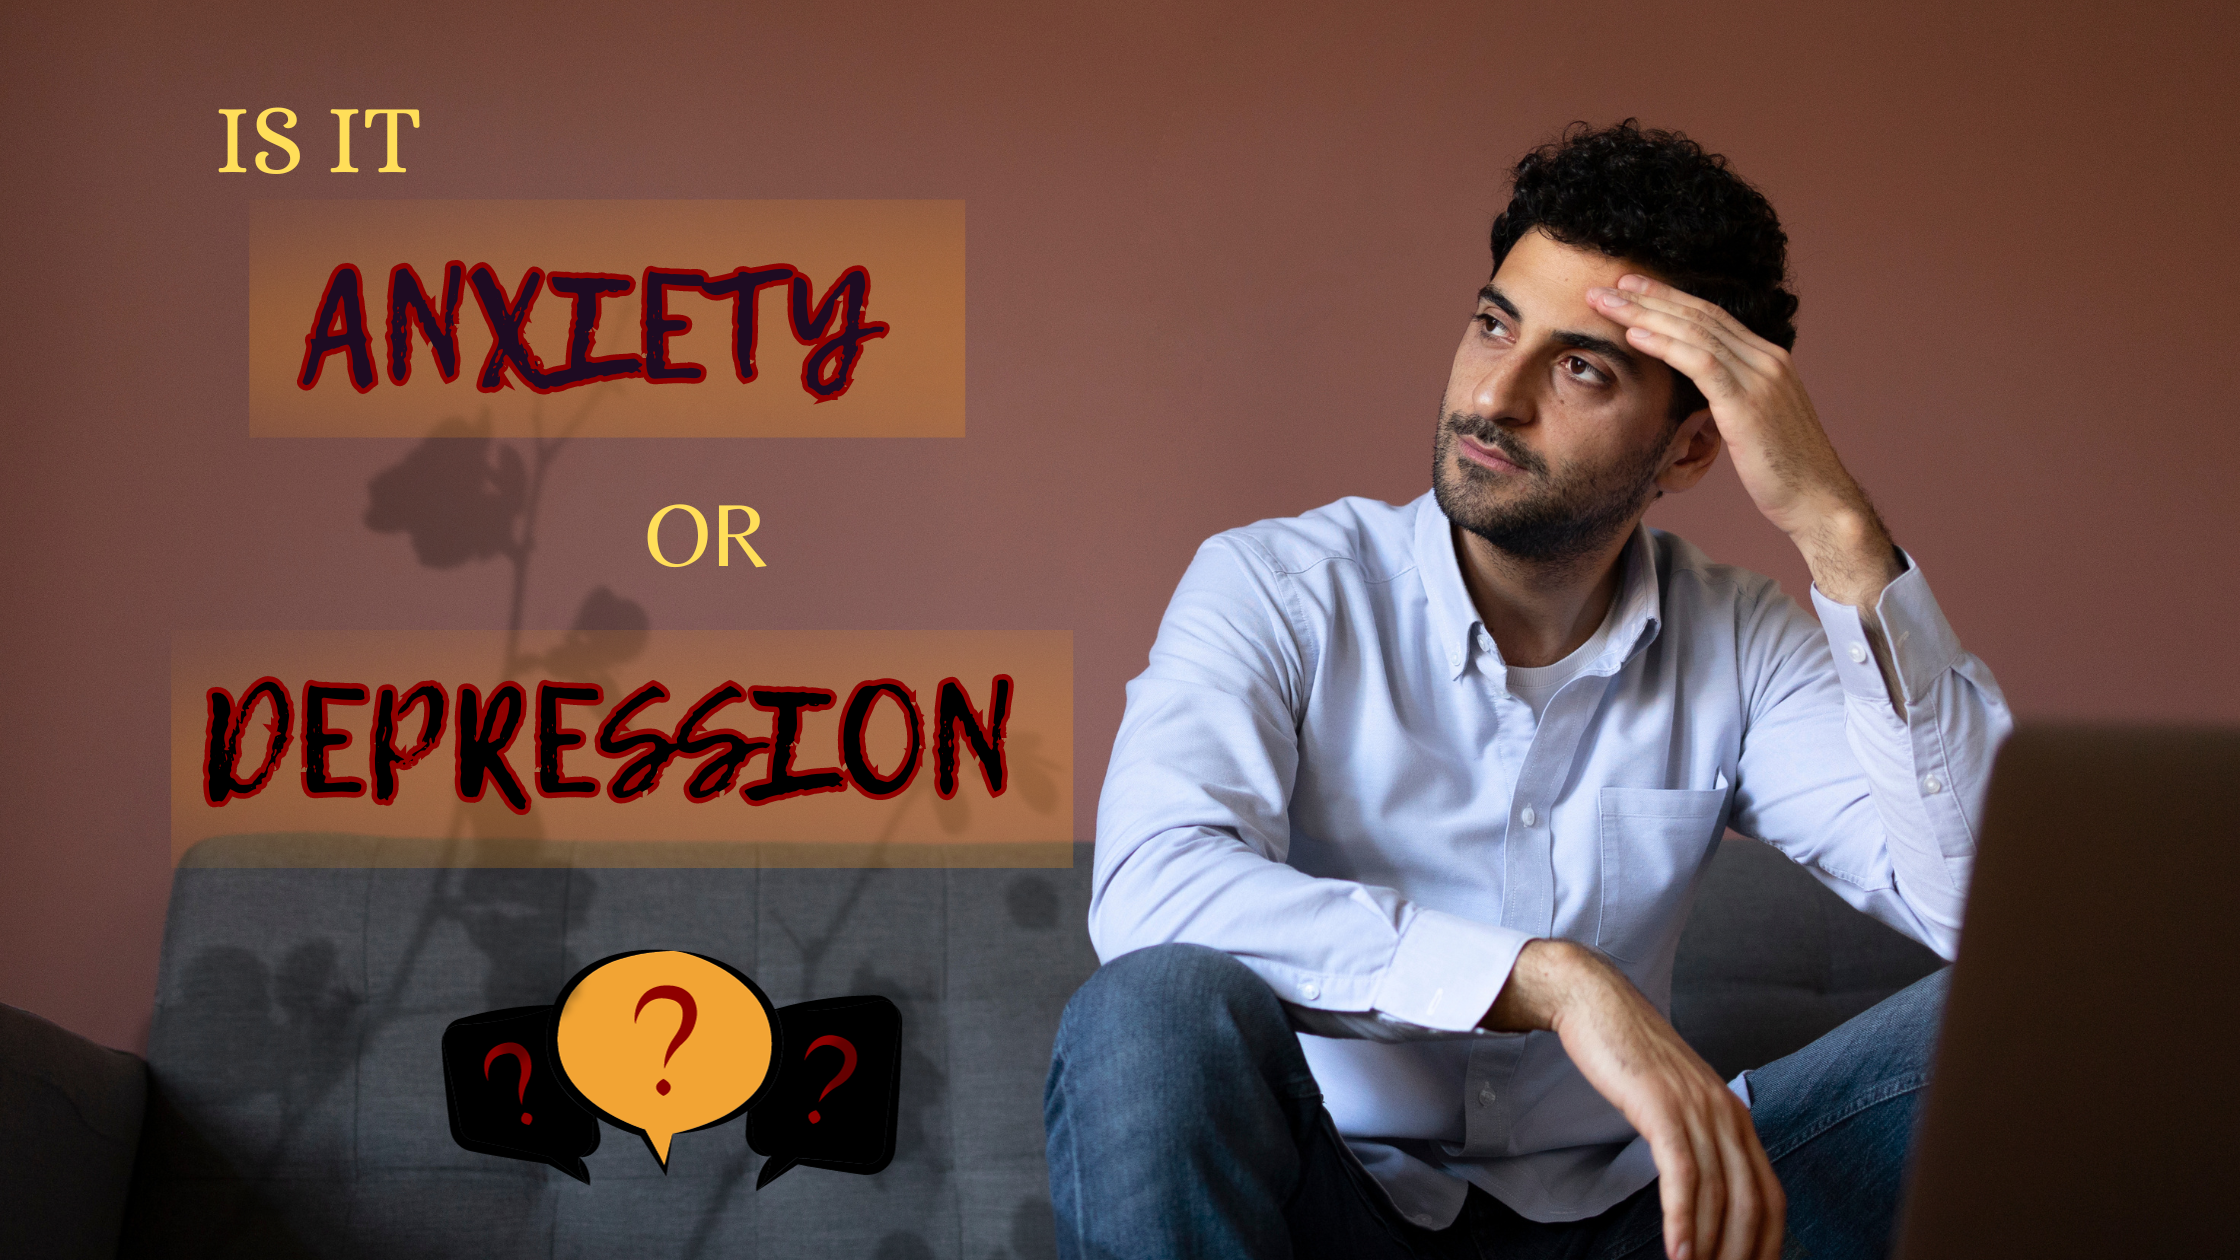 The link between anxiety and depression